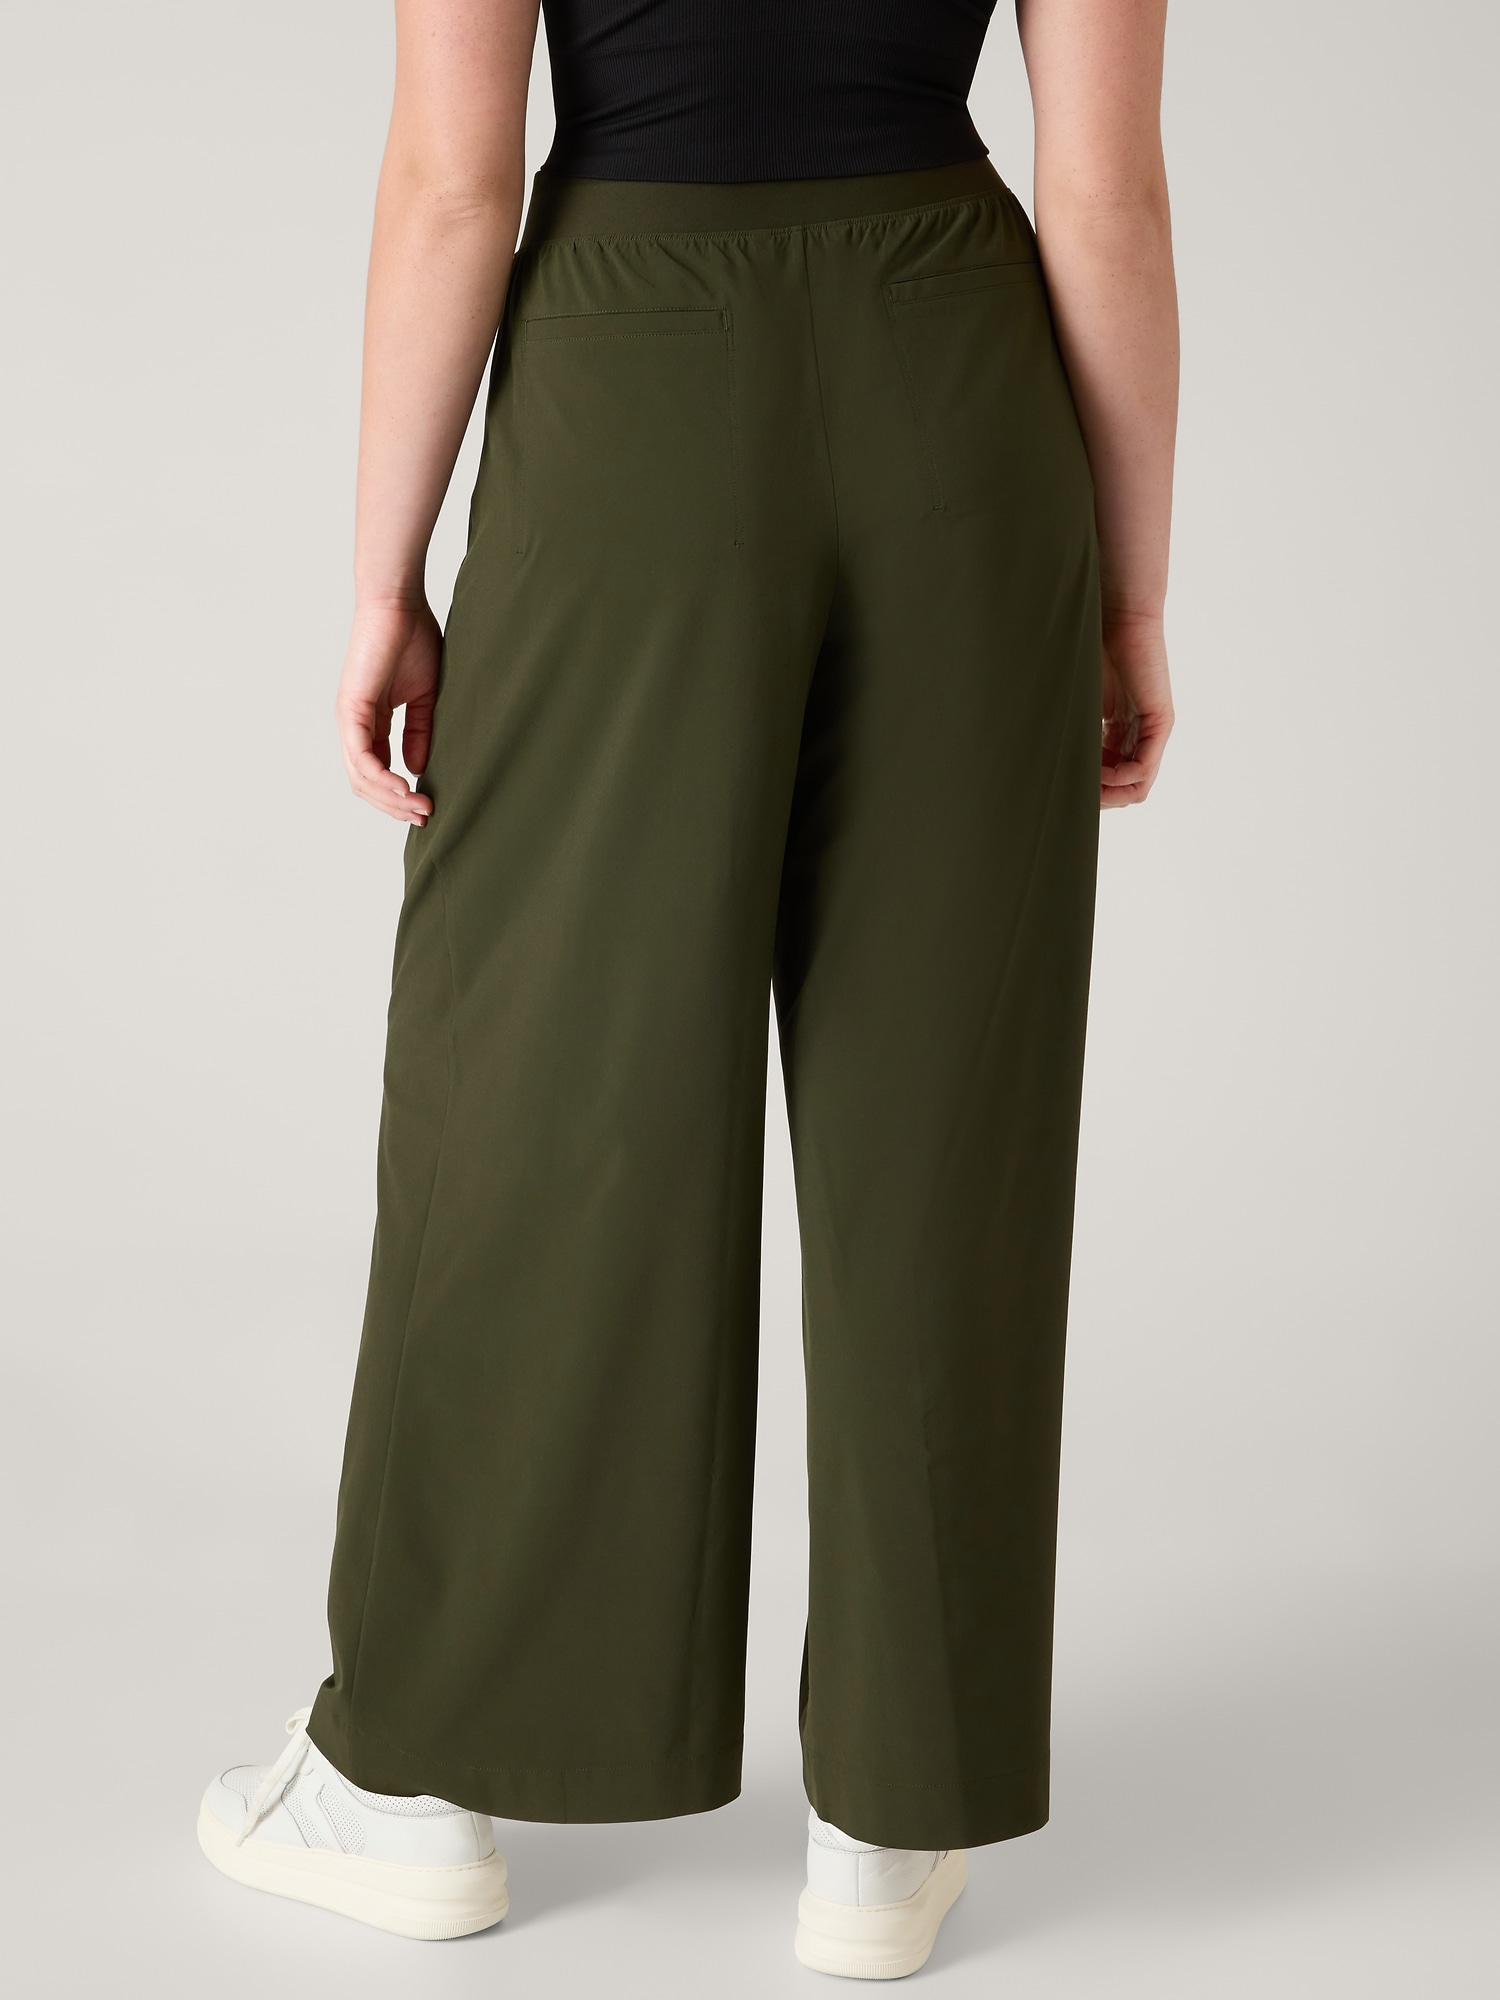 All in Motion Stretch Woven High Rise Wide Leg pants Green Size